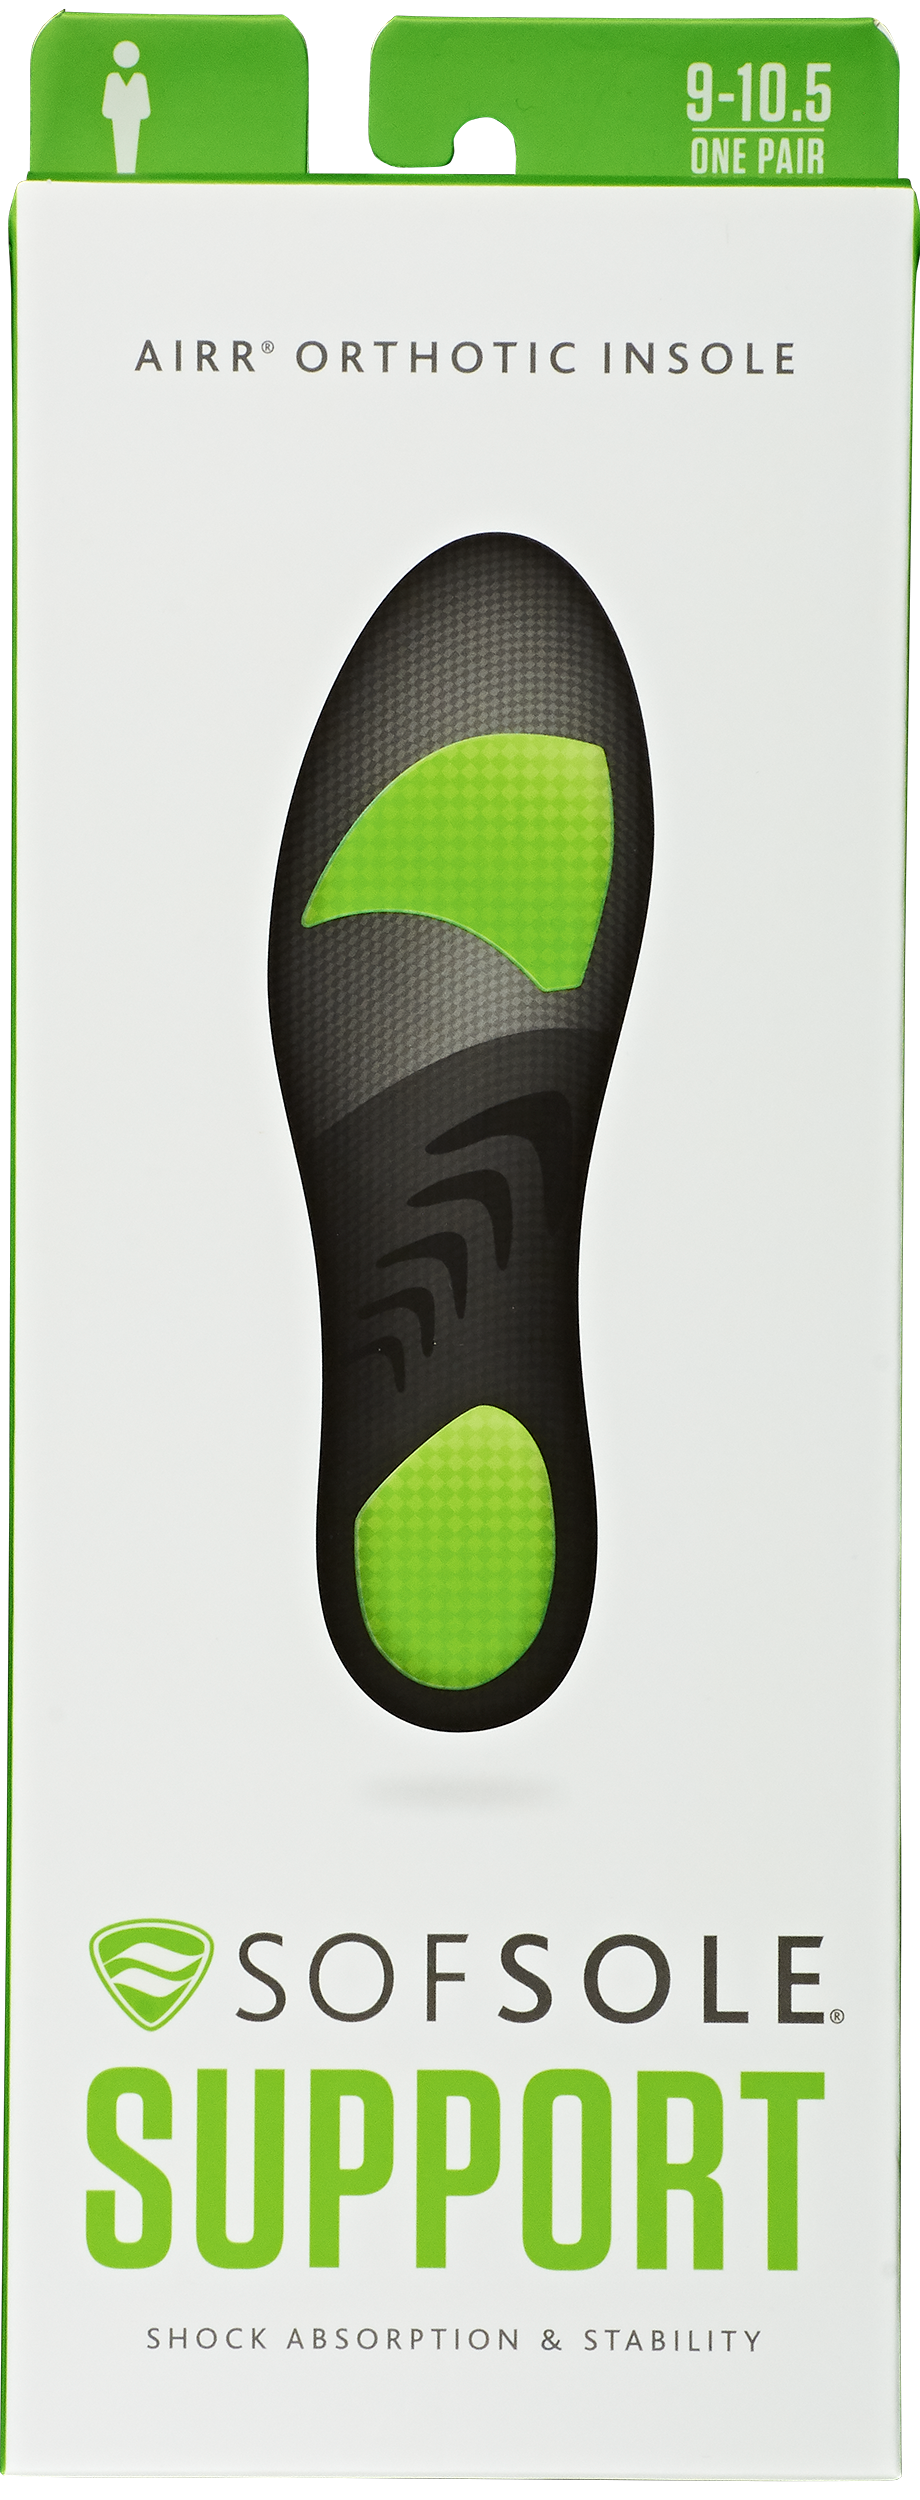 sof sole airr orthotic insoles